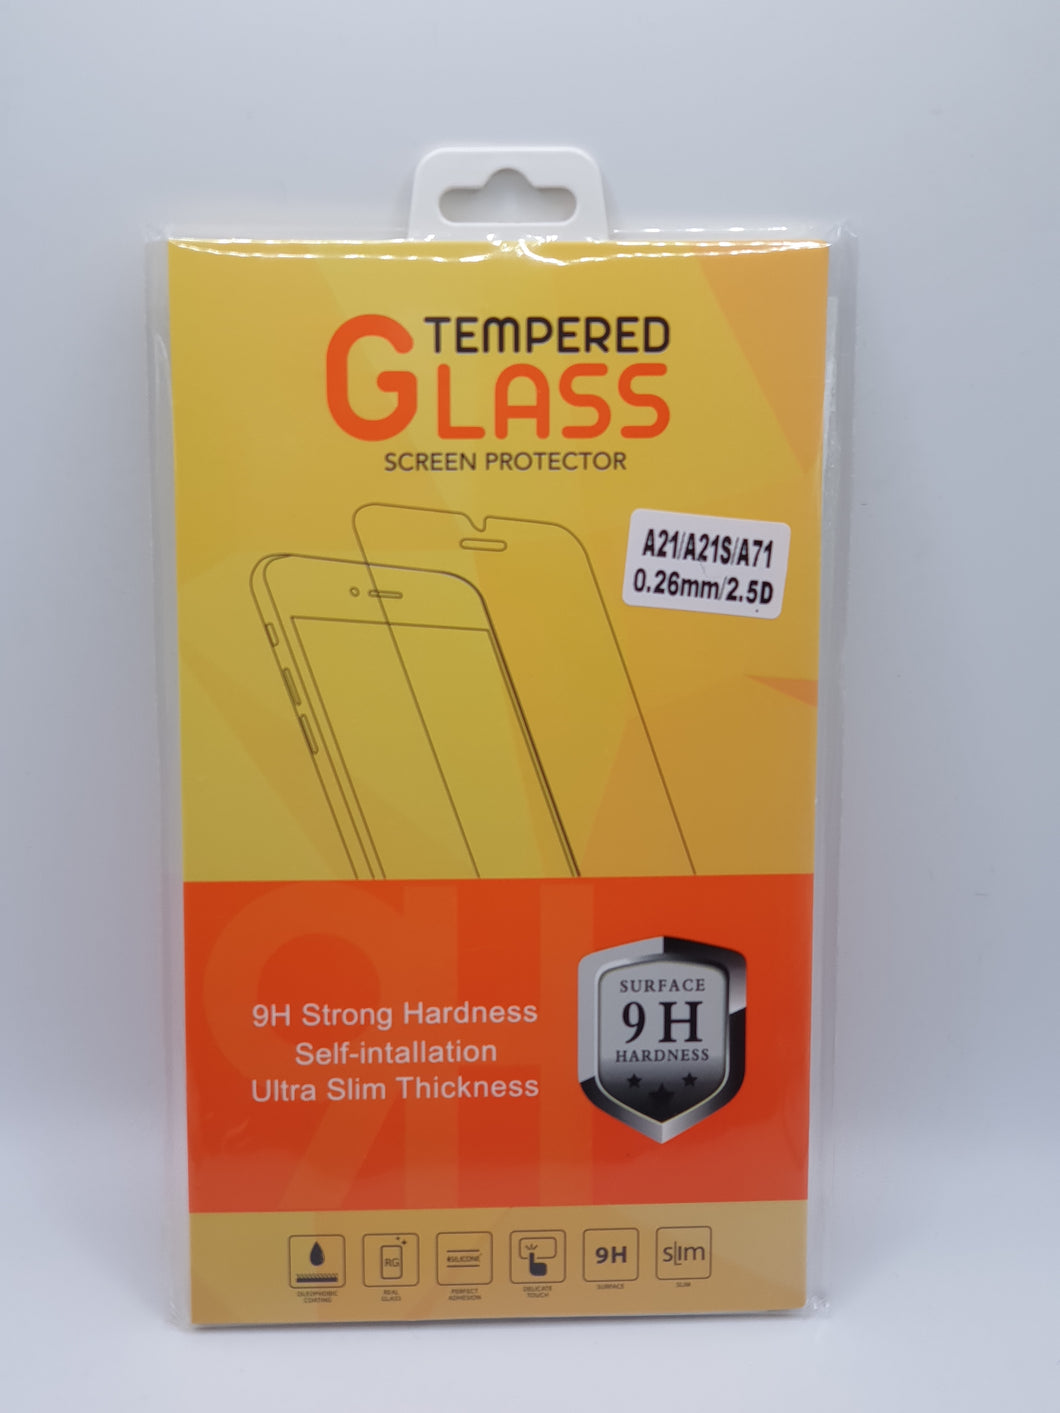 Samsung Galaxy A71 Tempered Glass Screen Protector 9H Toughened Impact Shield (2Pack)